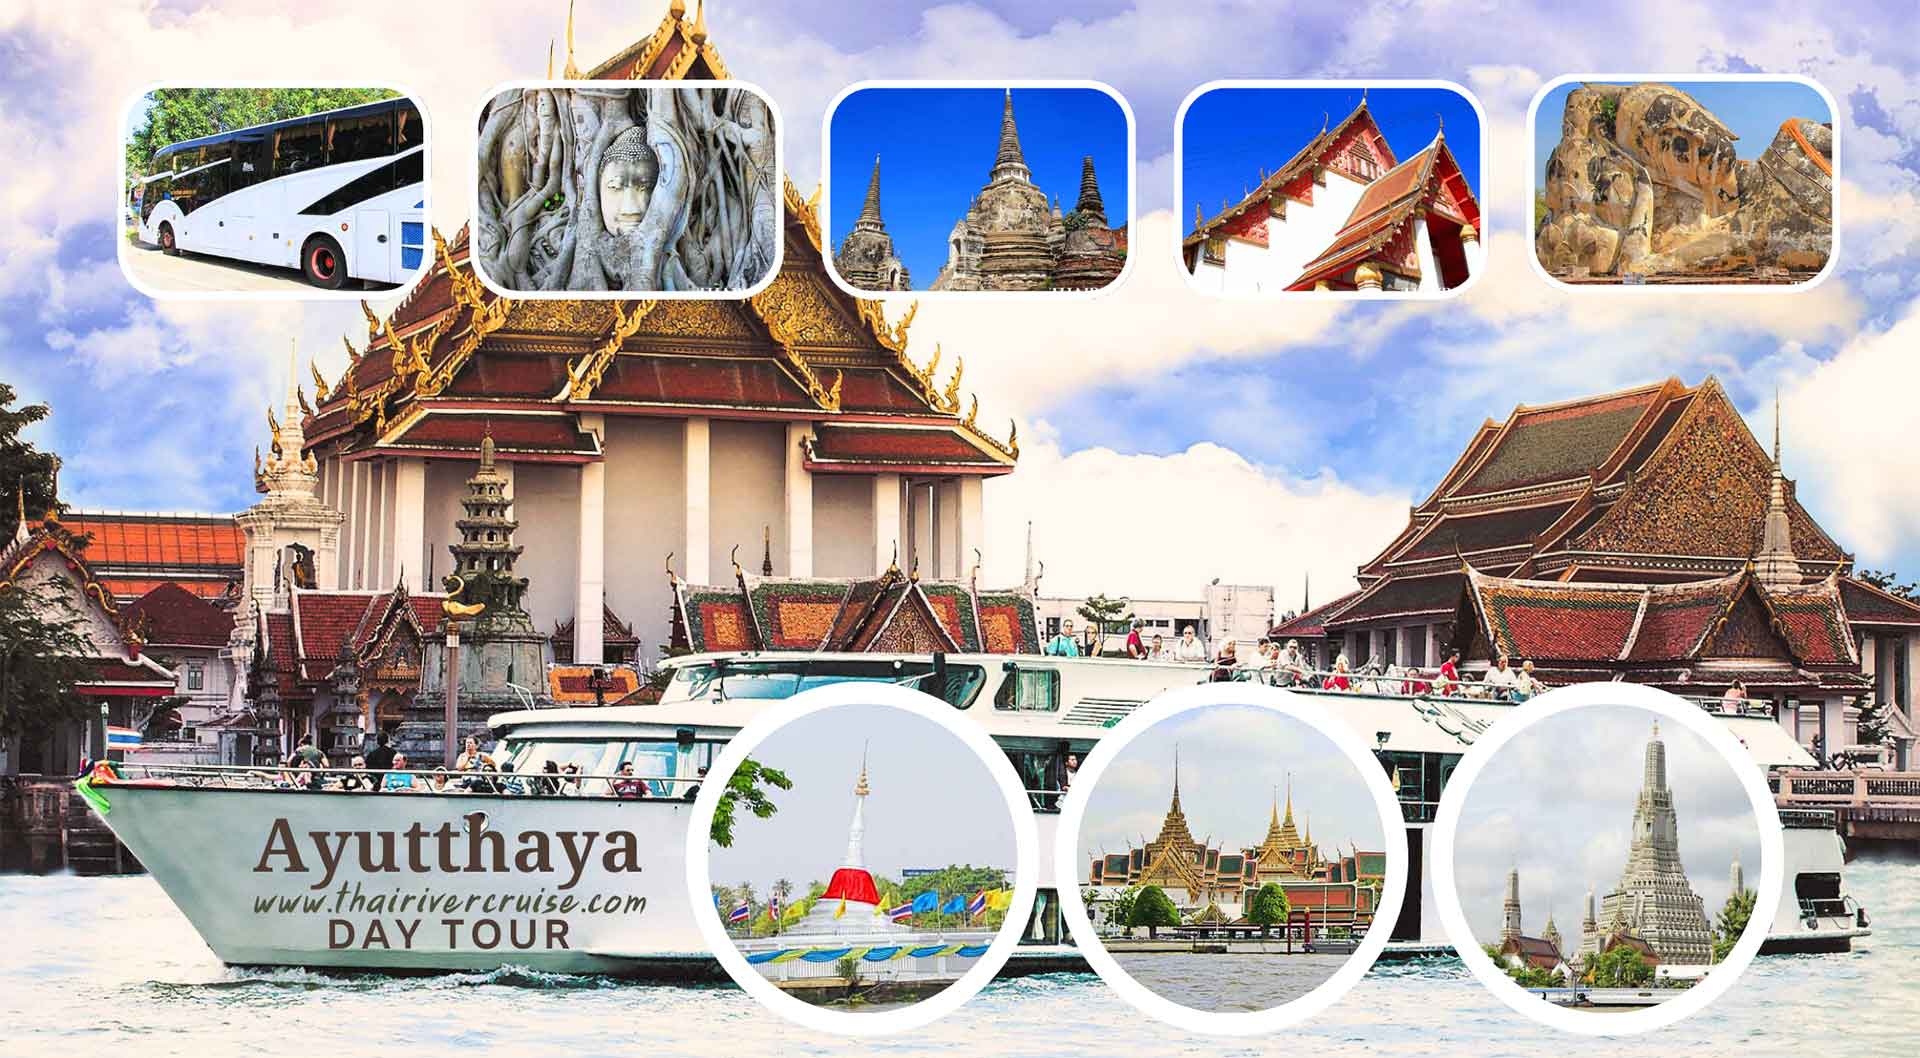 Ayutthaya Day Tour from Bangkok Grand Pearl Cruise go by Bus and back by Cruise with Buffet Lunch and Coffee Break